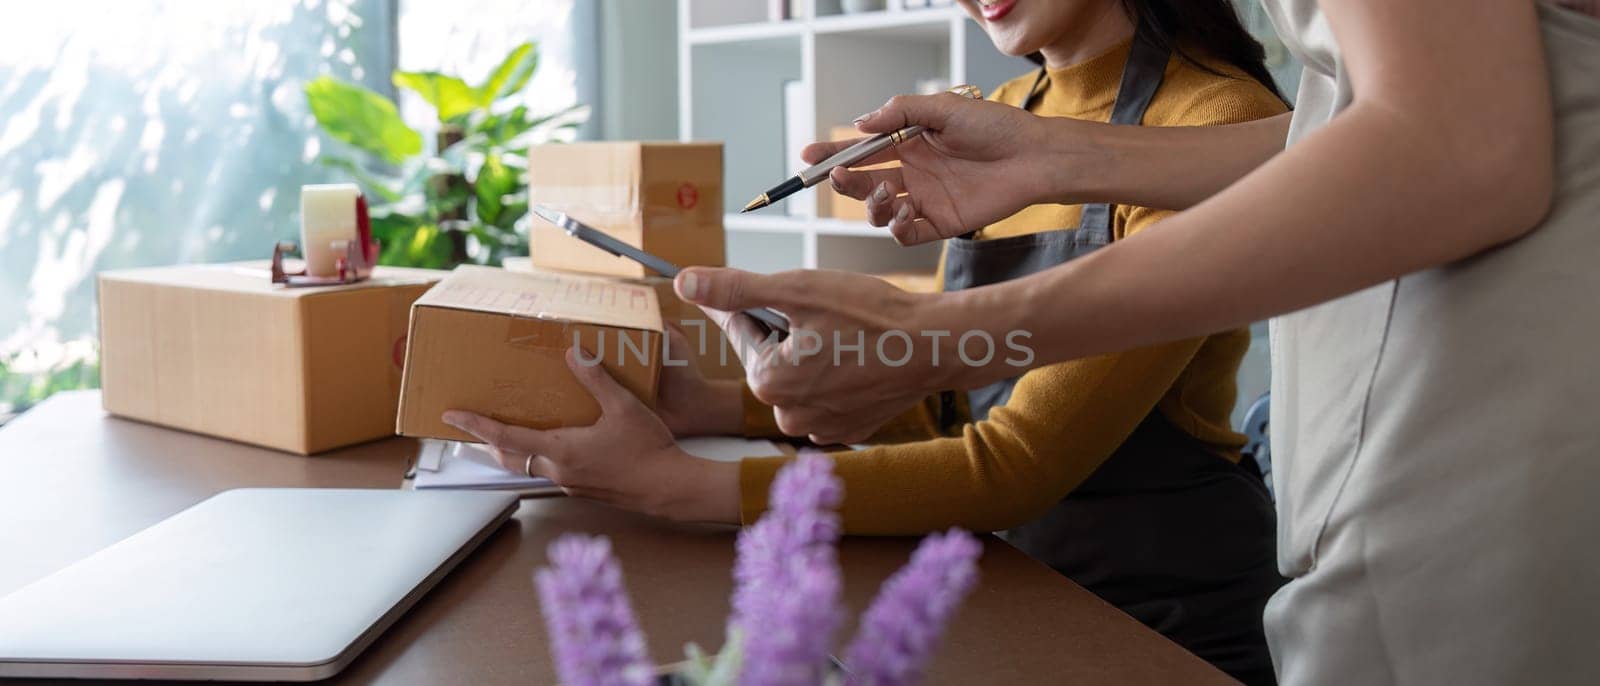 Entrepreneurs preparing packages in a bright home office.